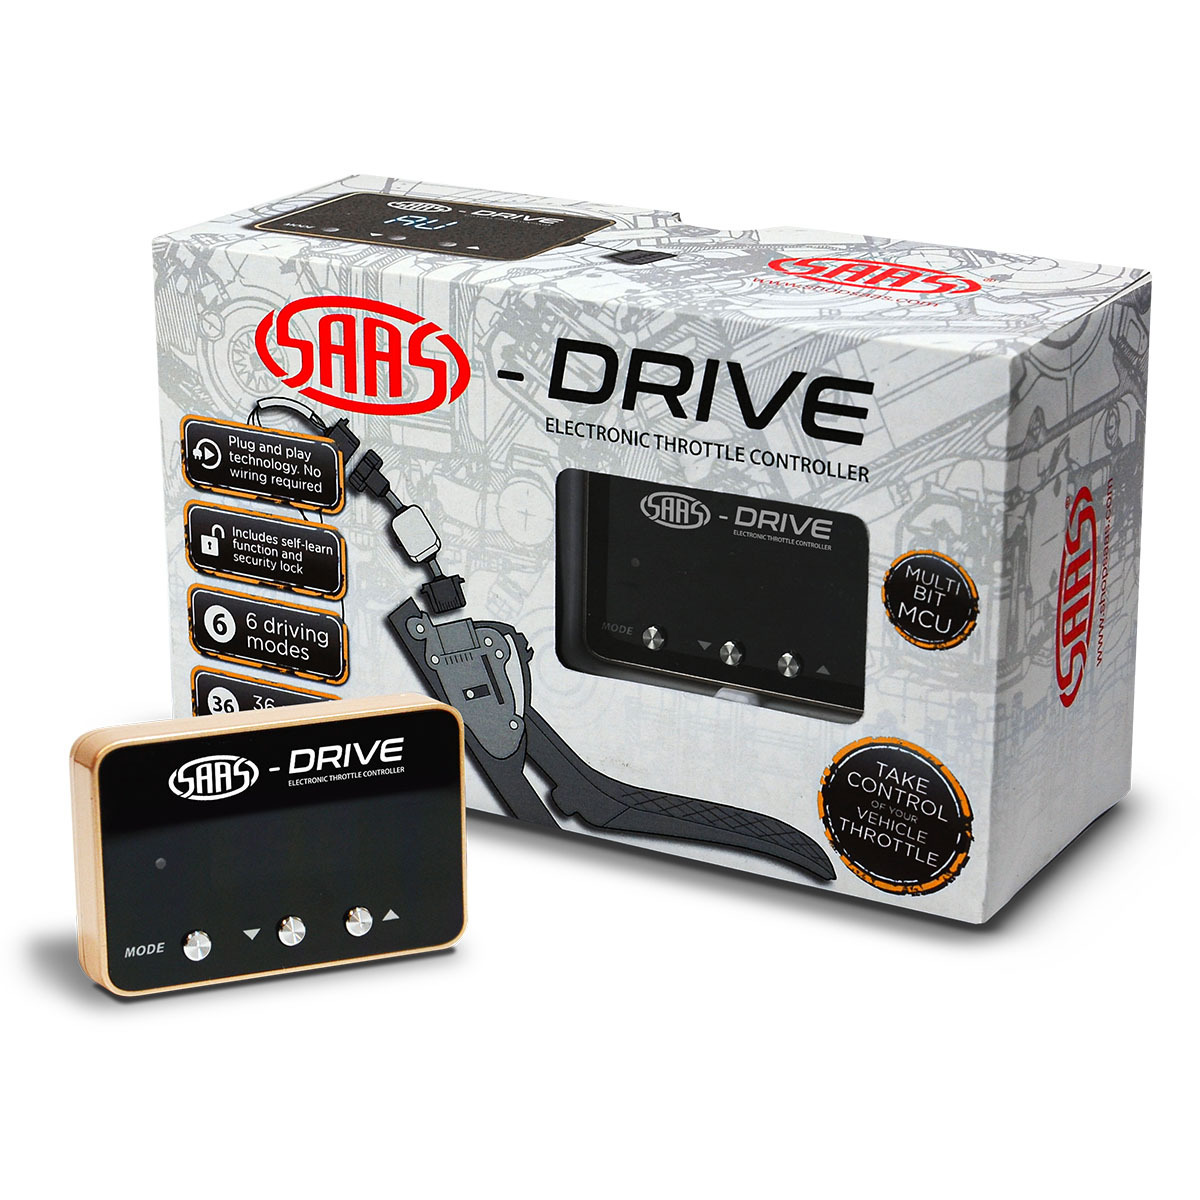 SAAS-Drive Ford Mustang 5th Gen 2005 - 2014 Throttle Controller 